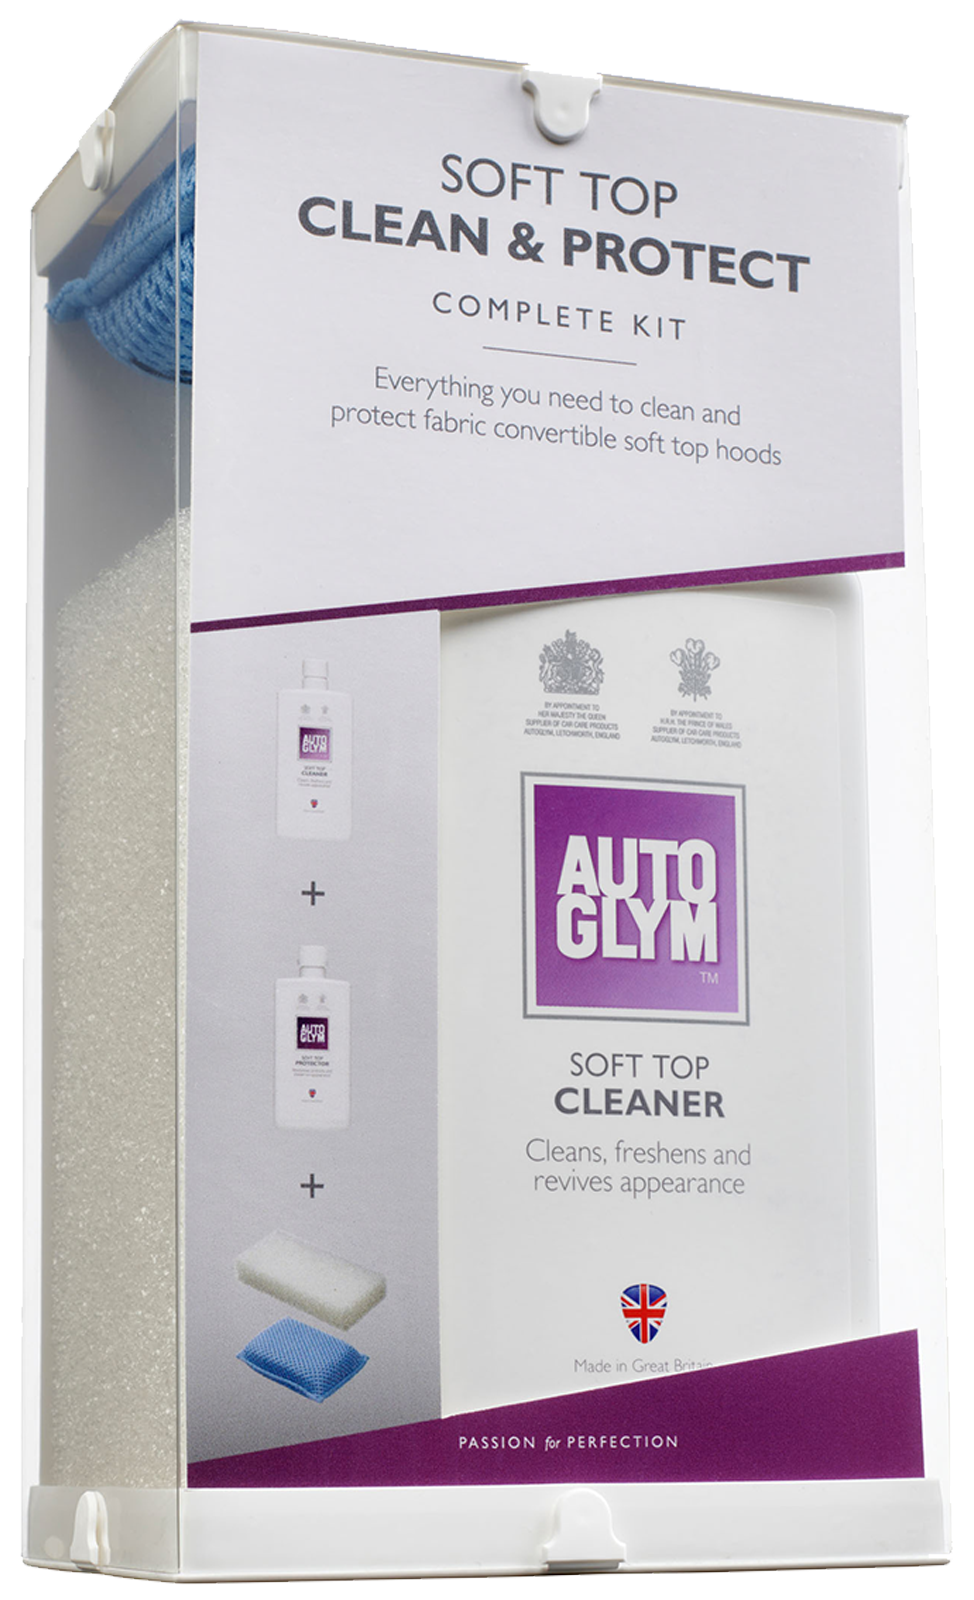 Auto Glym - Convertible Soft Top Clean & Protect Kit